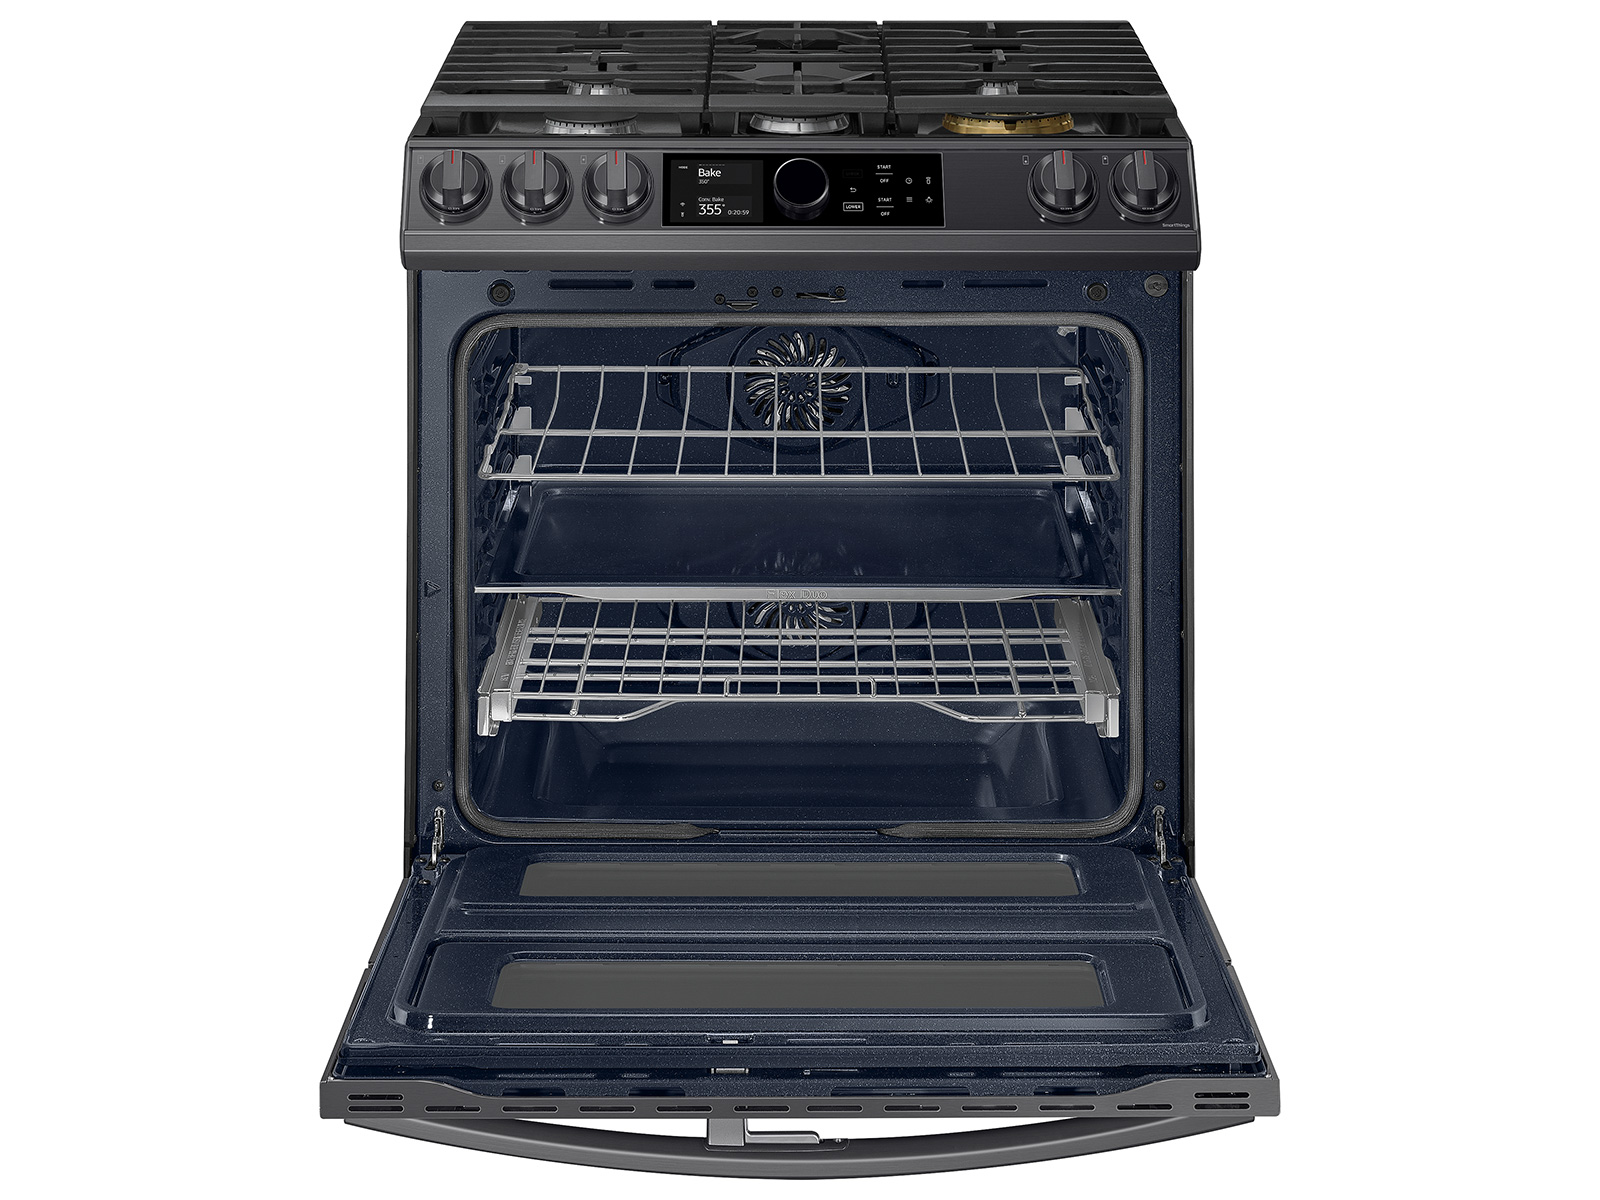 NY63T8751SG Samsung 6.3 cu. ft. Flex Duo™ Front Control Slide-in Dual Fuel  Range with Smart Dial, Air Fry, and Wi-Fi in Black Stainless Steel